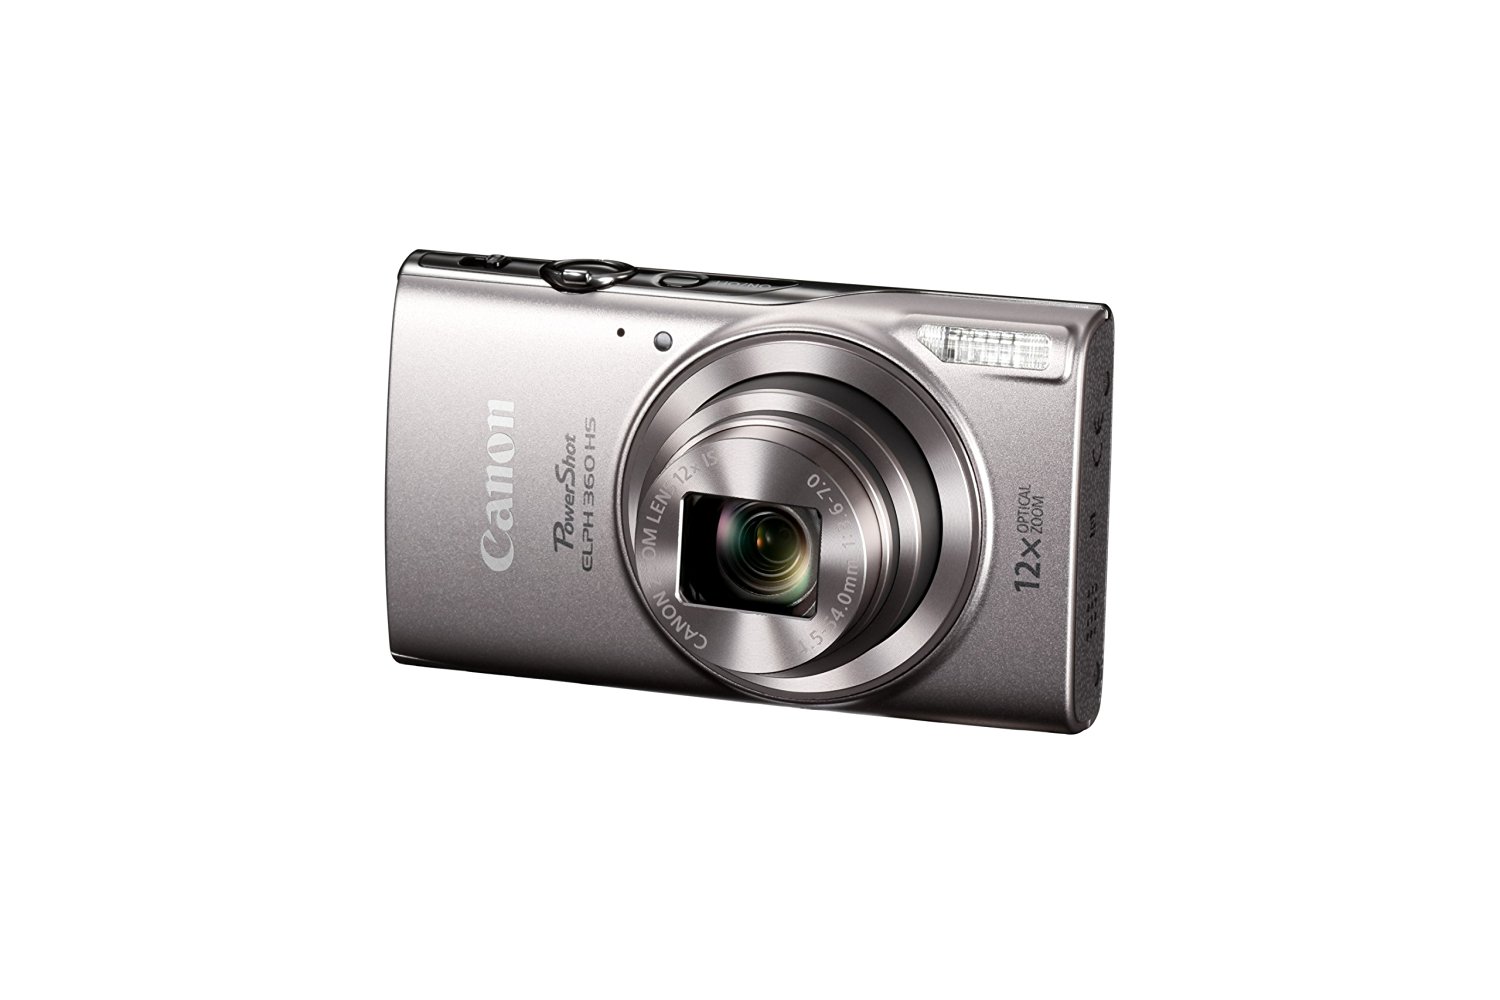 Interaction Separation grass Canon PowerShot ELPH 360 Review: A Beginner's Compact Camera